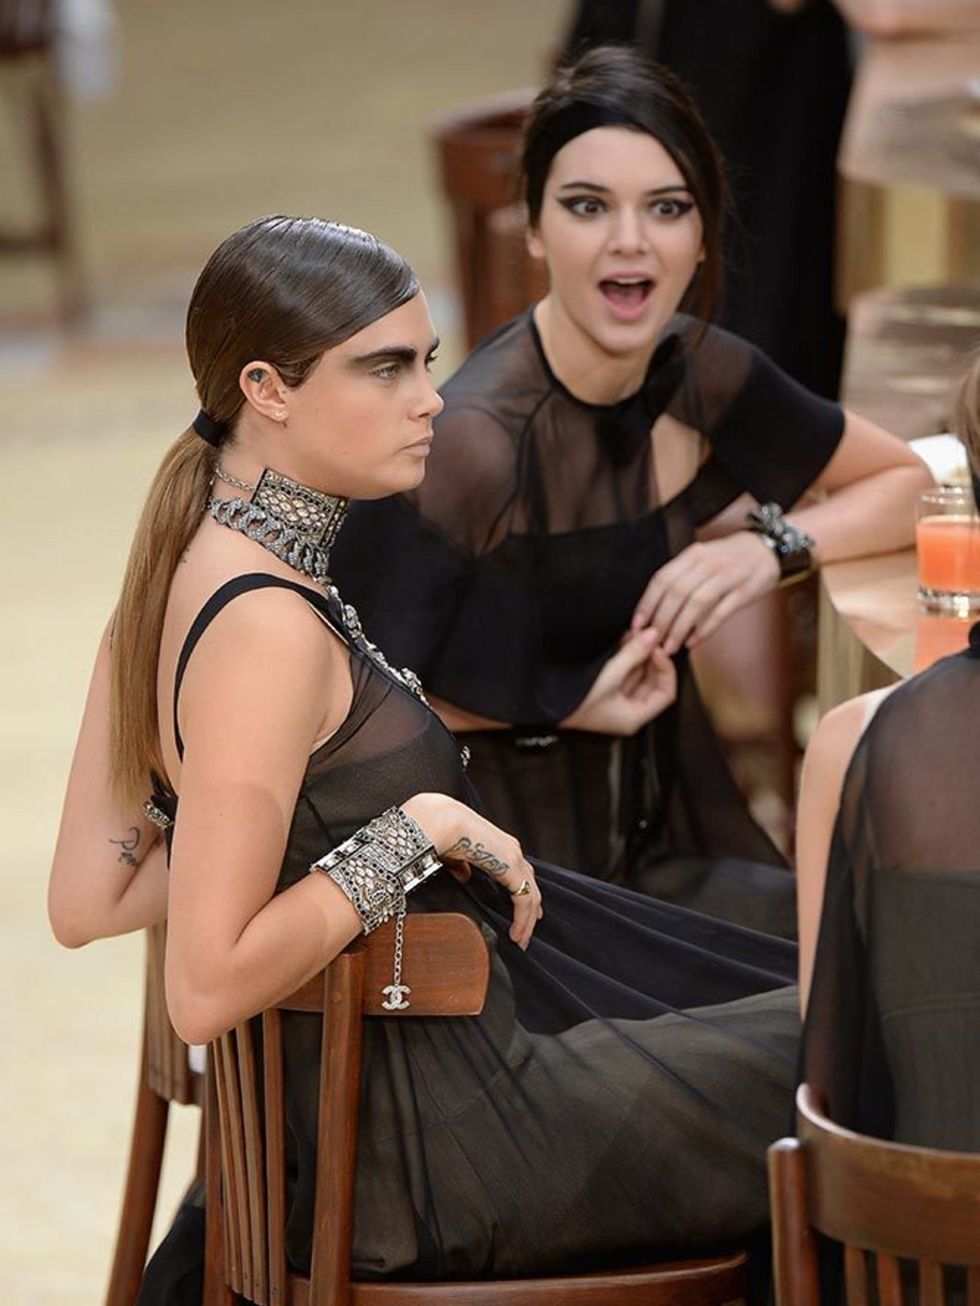 Kendall and bff Cara Delevingne during the Chanel show, March 2015.